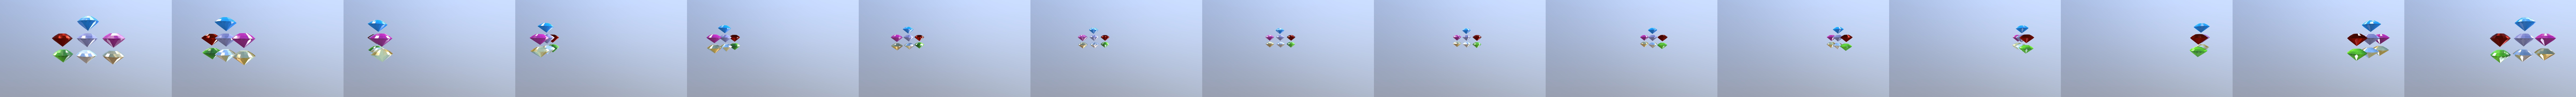 All 7 Chaos Emeralds from Sonic the Hedgehog by